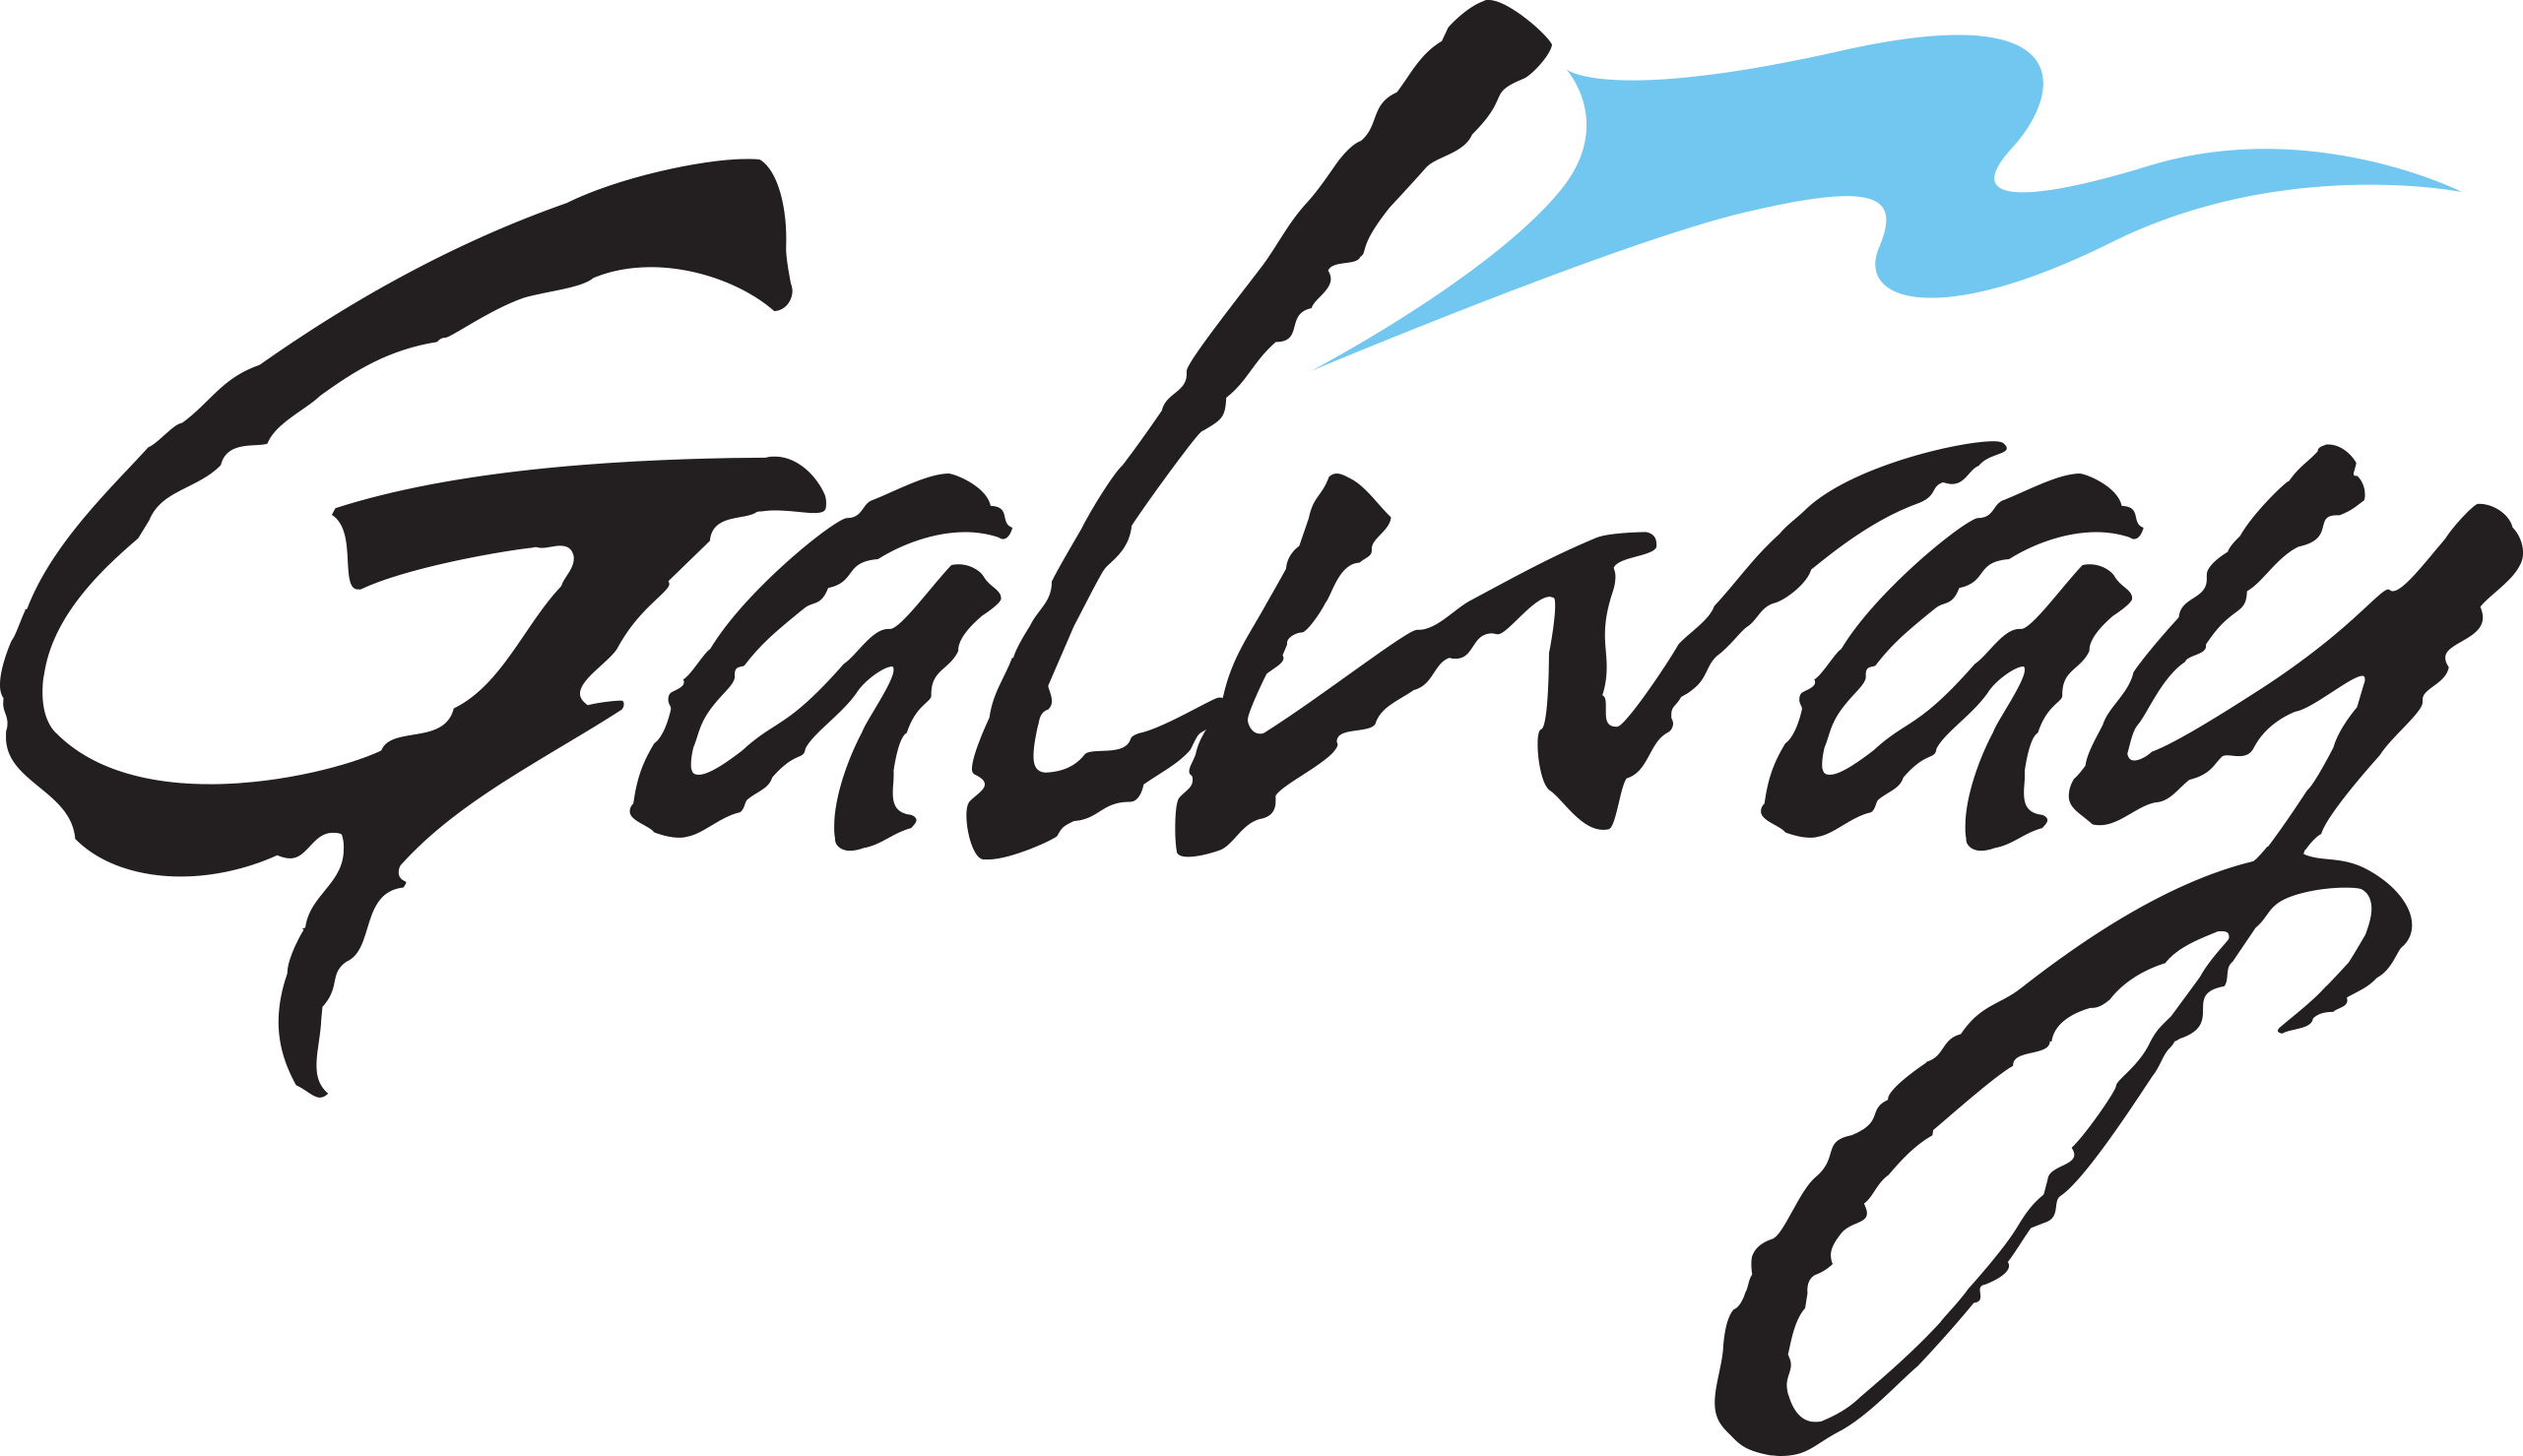 Galway Logo - All roads lead to Galway - St. John's Board of Trade